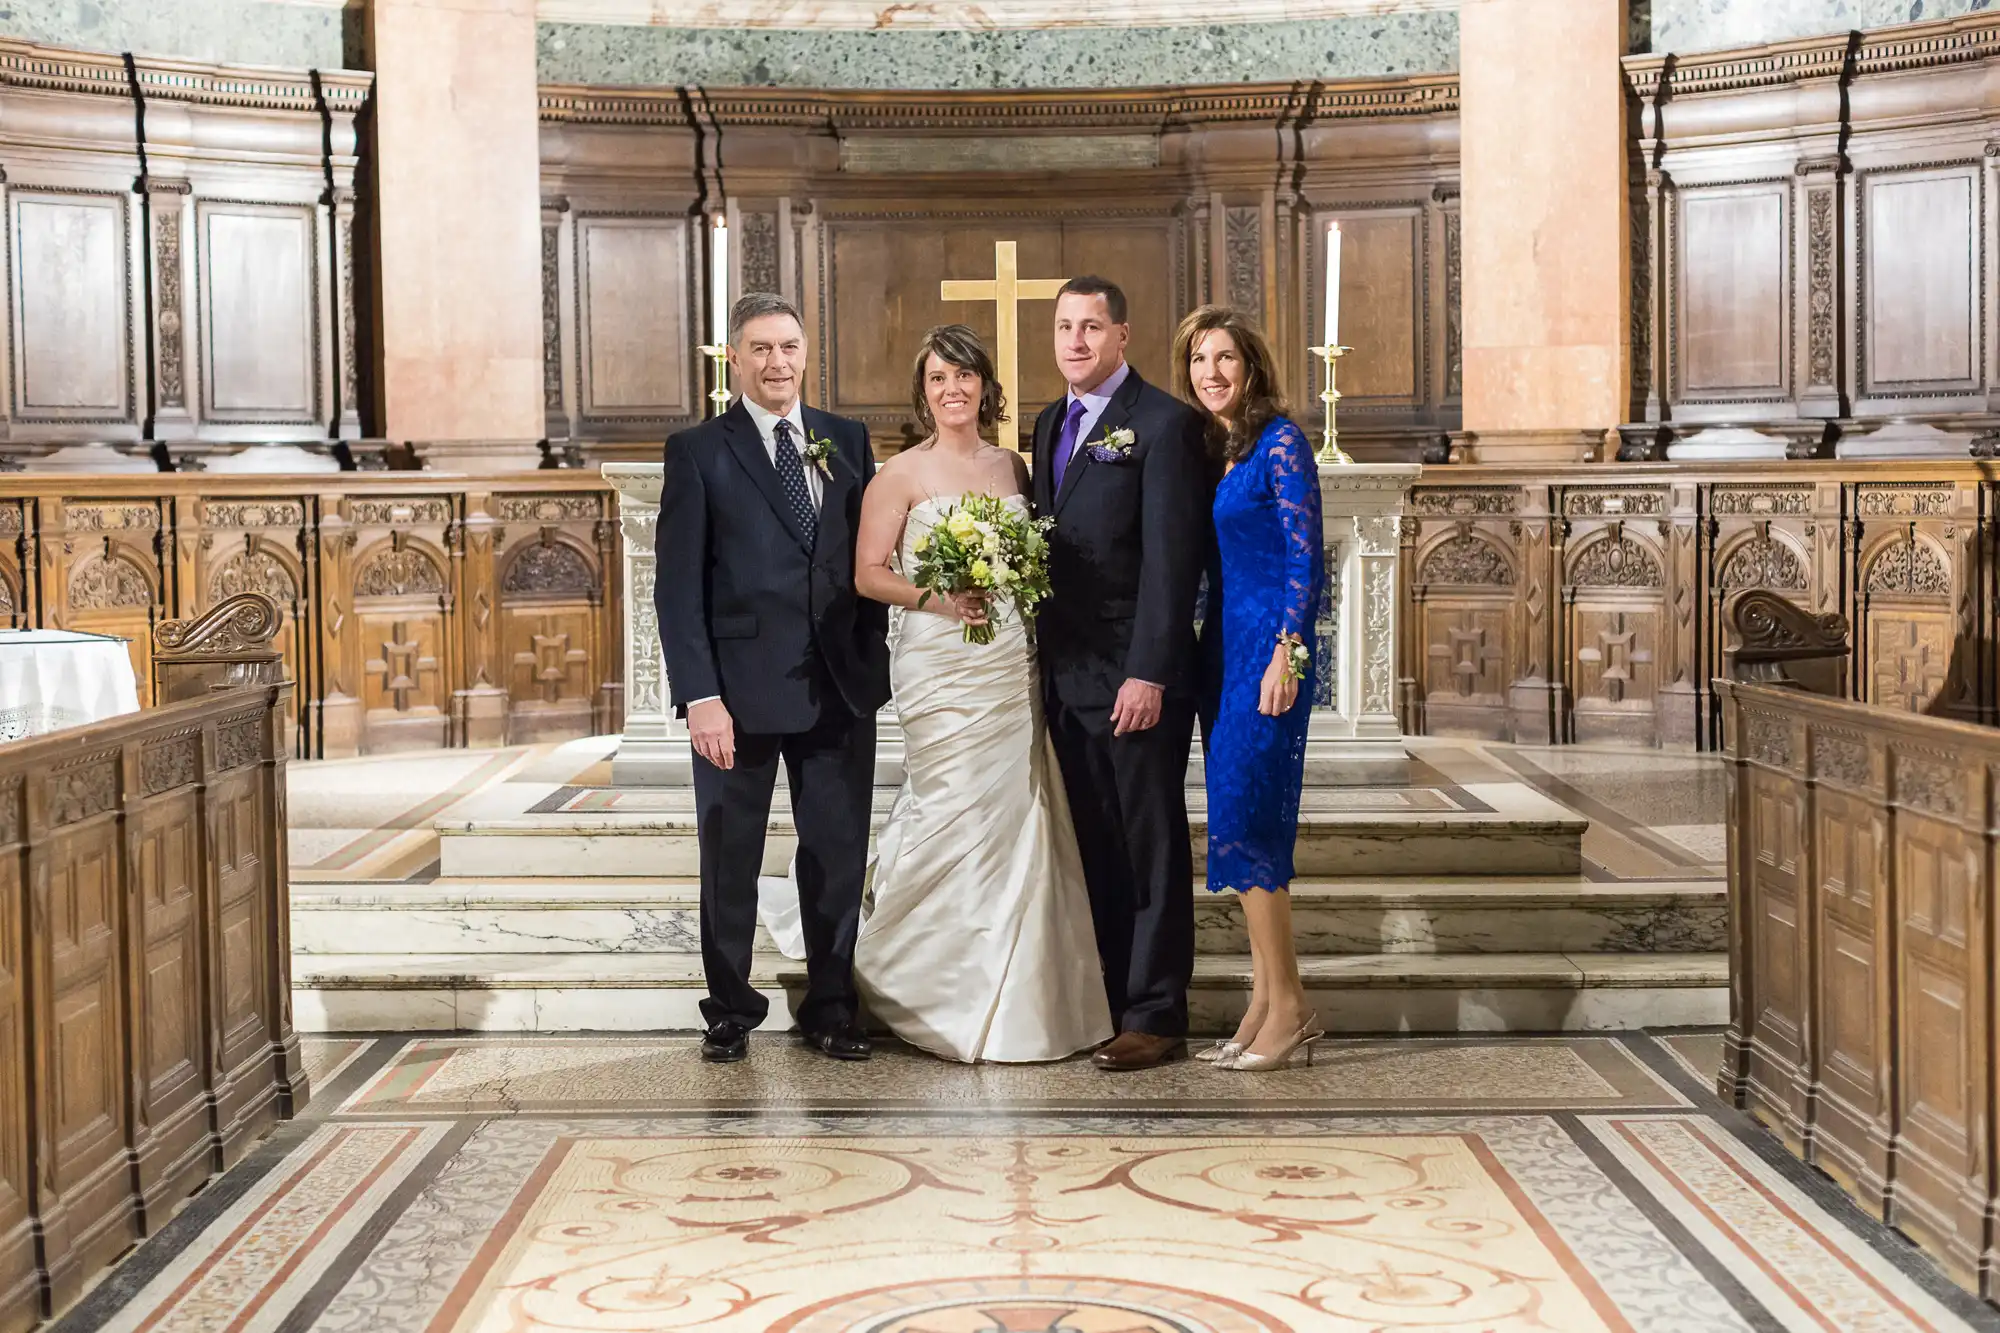 Two couples stand in a church, smiling, with a bride in a white dress holding a bouquet, flanked by two men in suits and a woman in a blue dress.